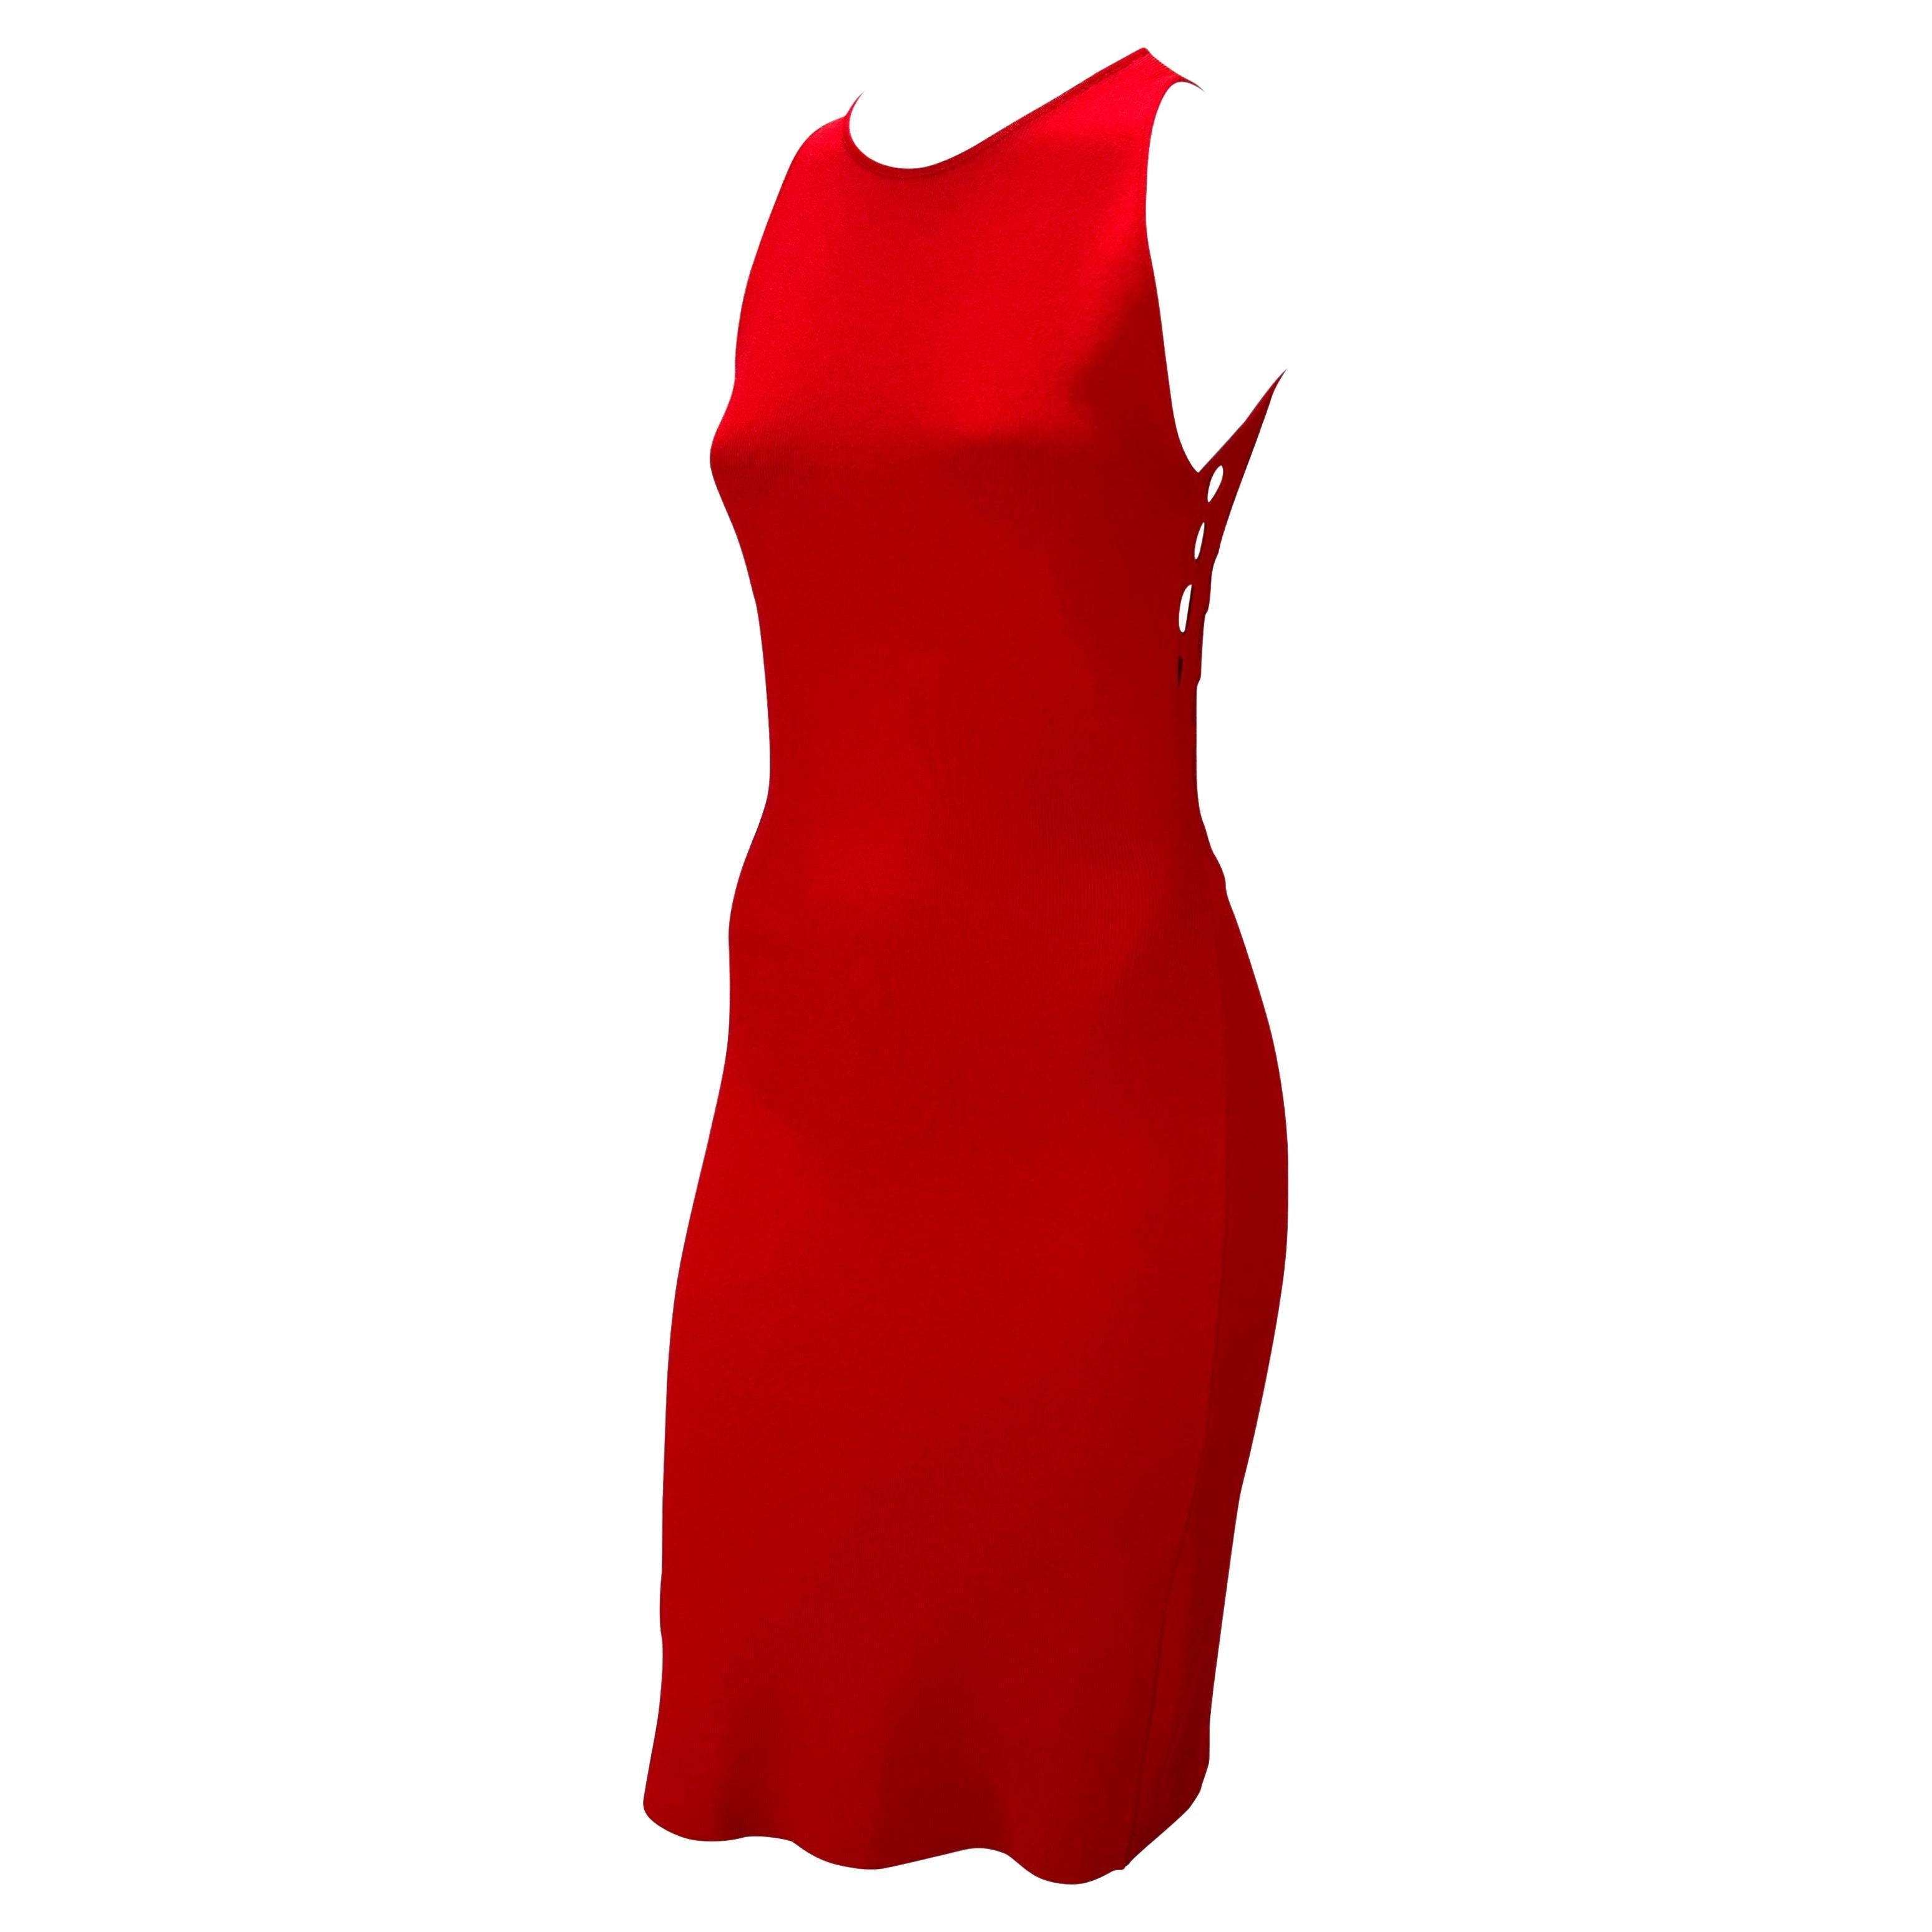 S/S 2002 Gianni Versace by Donatella Red Eyelet Cutout Stretch Racerback Dress For Sale 1